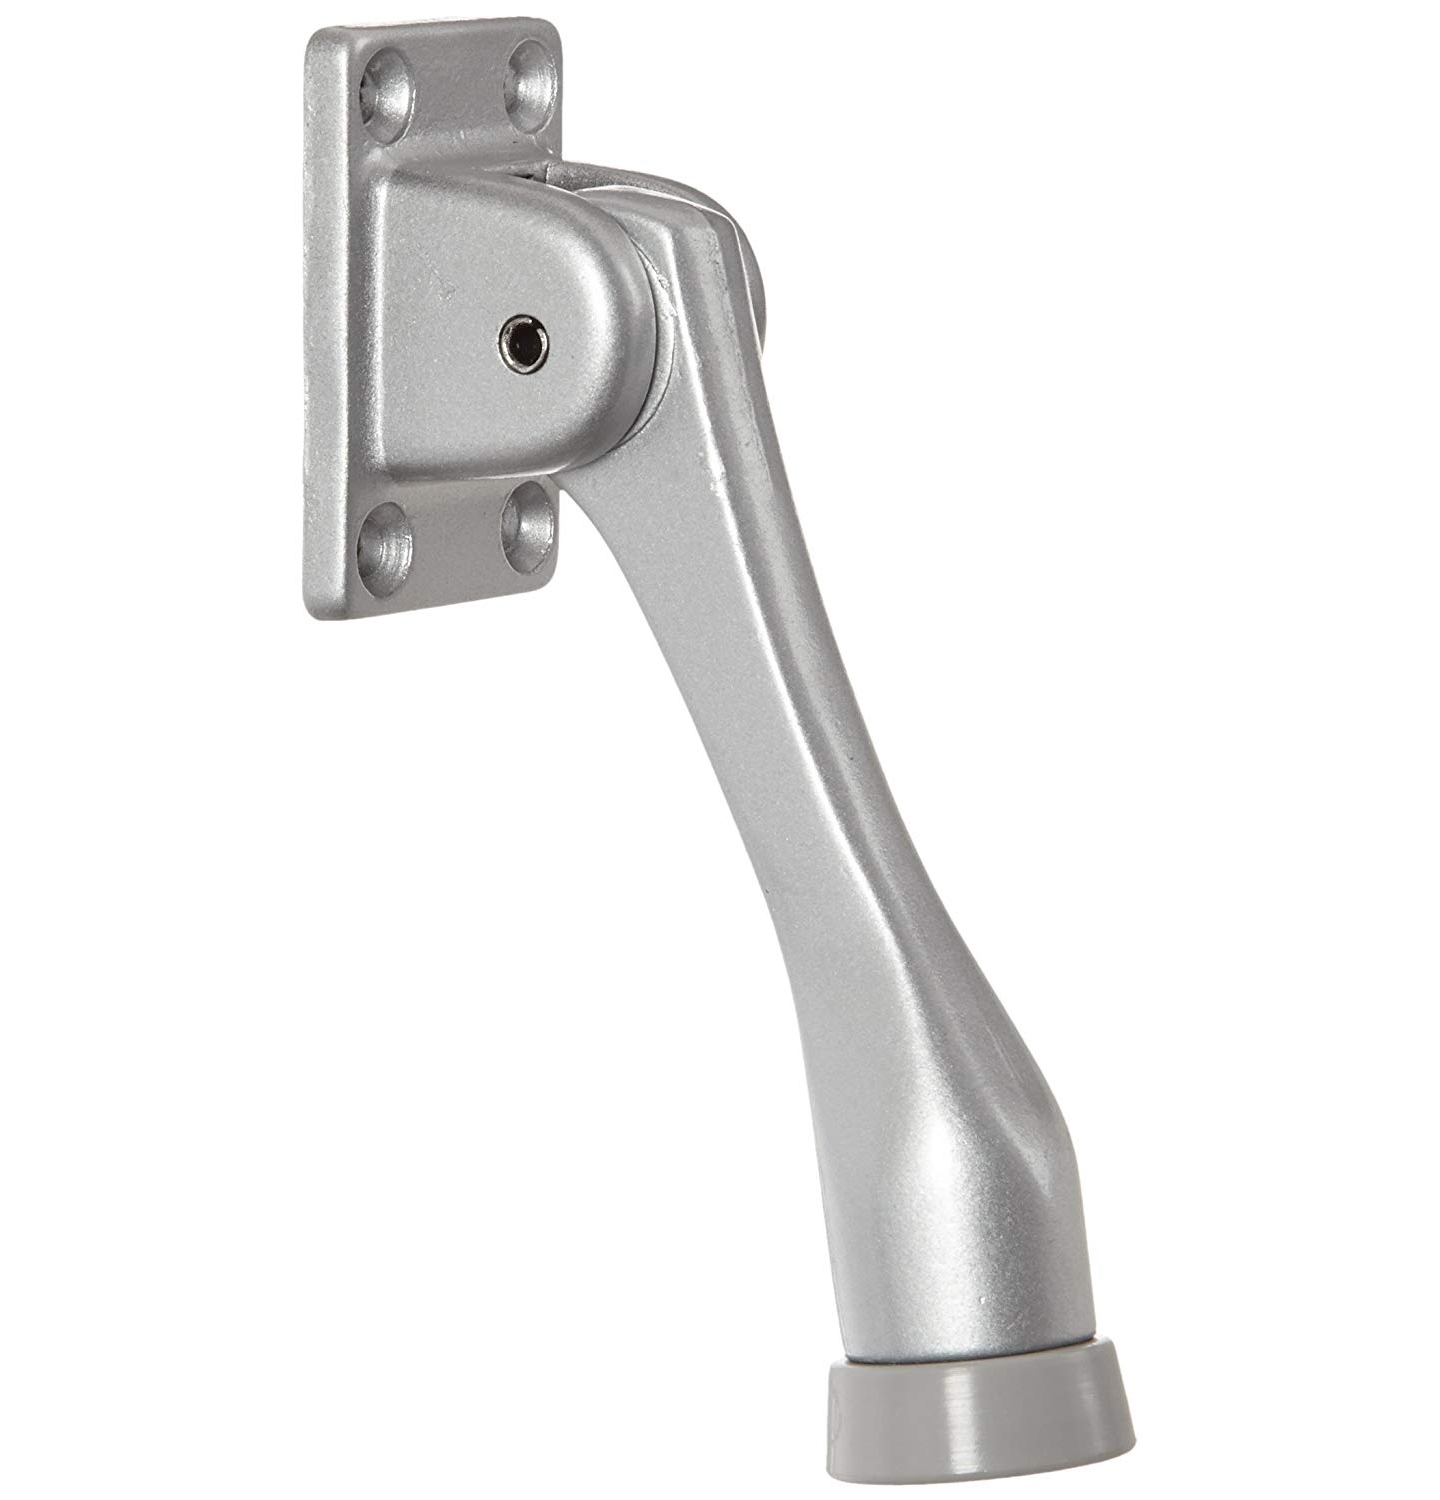 Rockwood 460.ALM Aluminum Kick Down Door Stop, #8 x 1 FH SMS Fastener, 4" Projection, 2-1/16" Base Width x 1-3/8" Base Length, Silver Finish